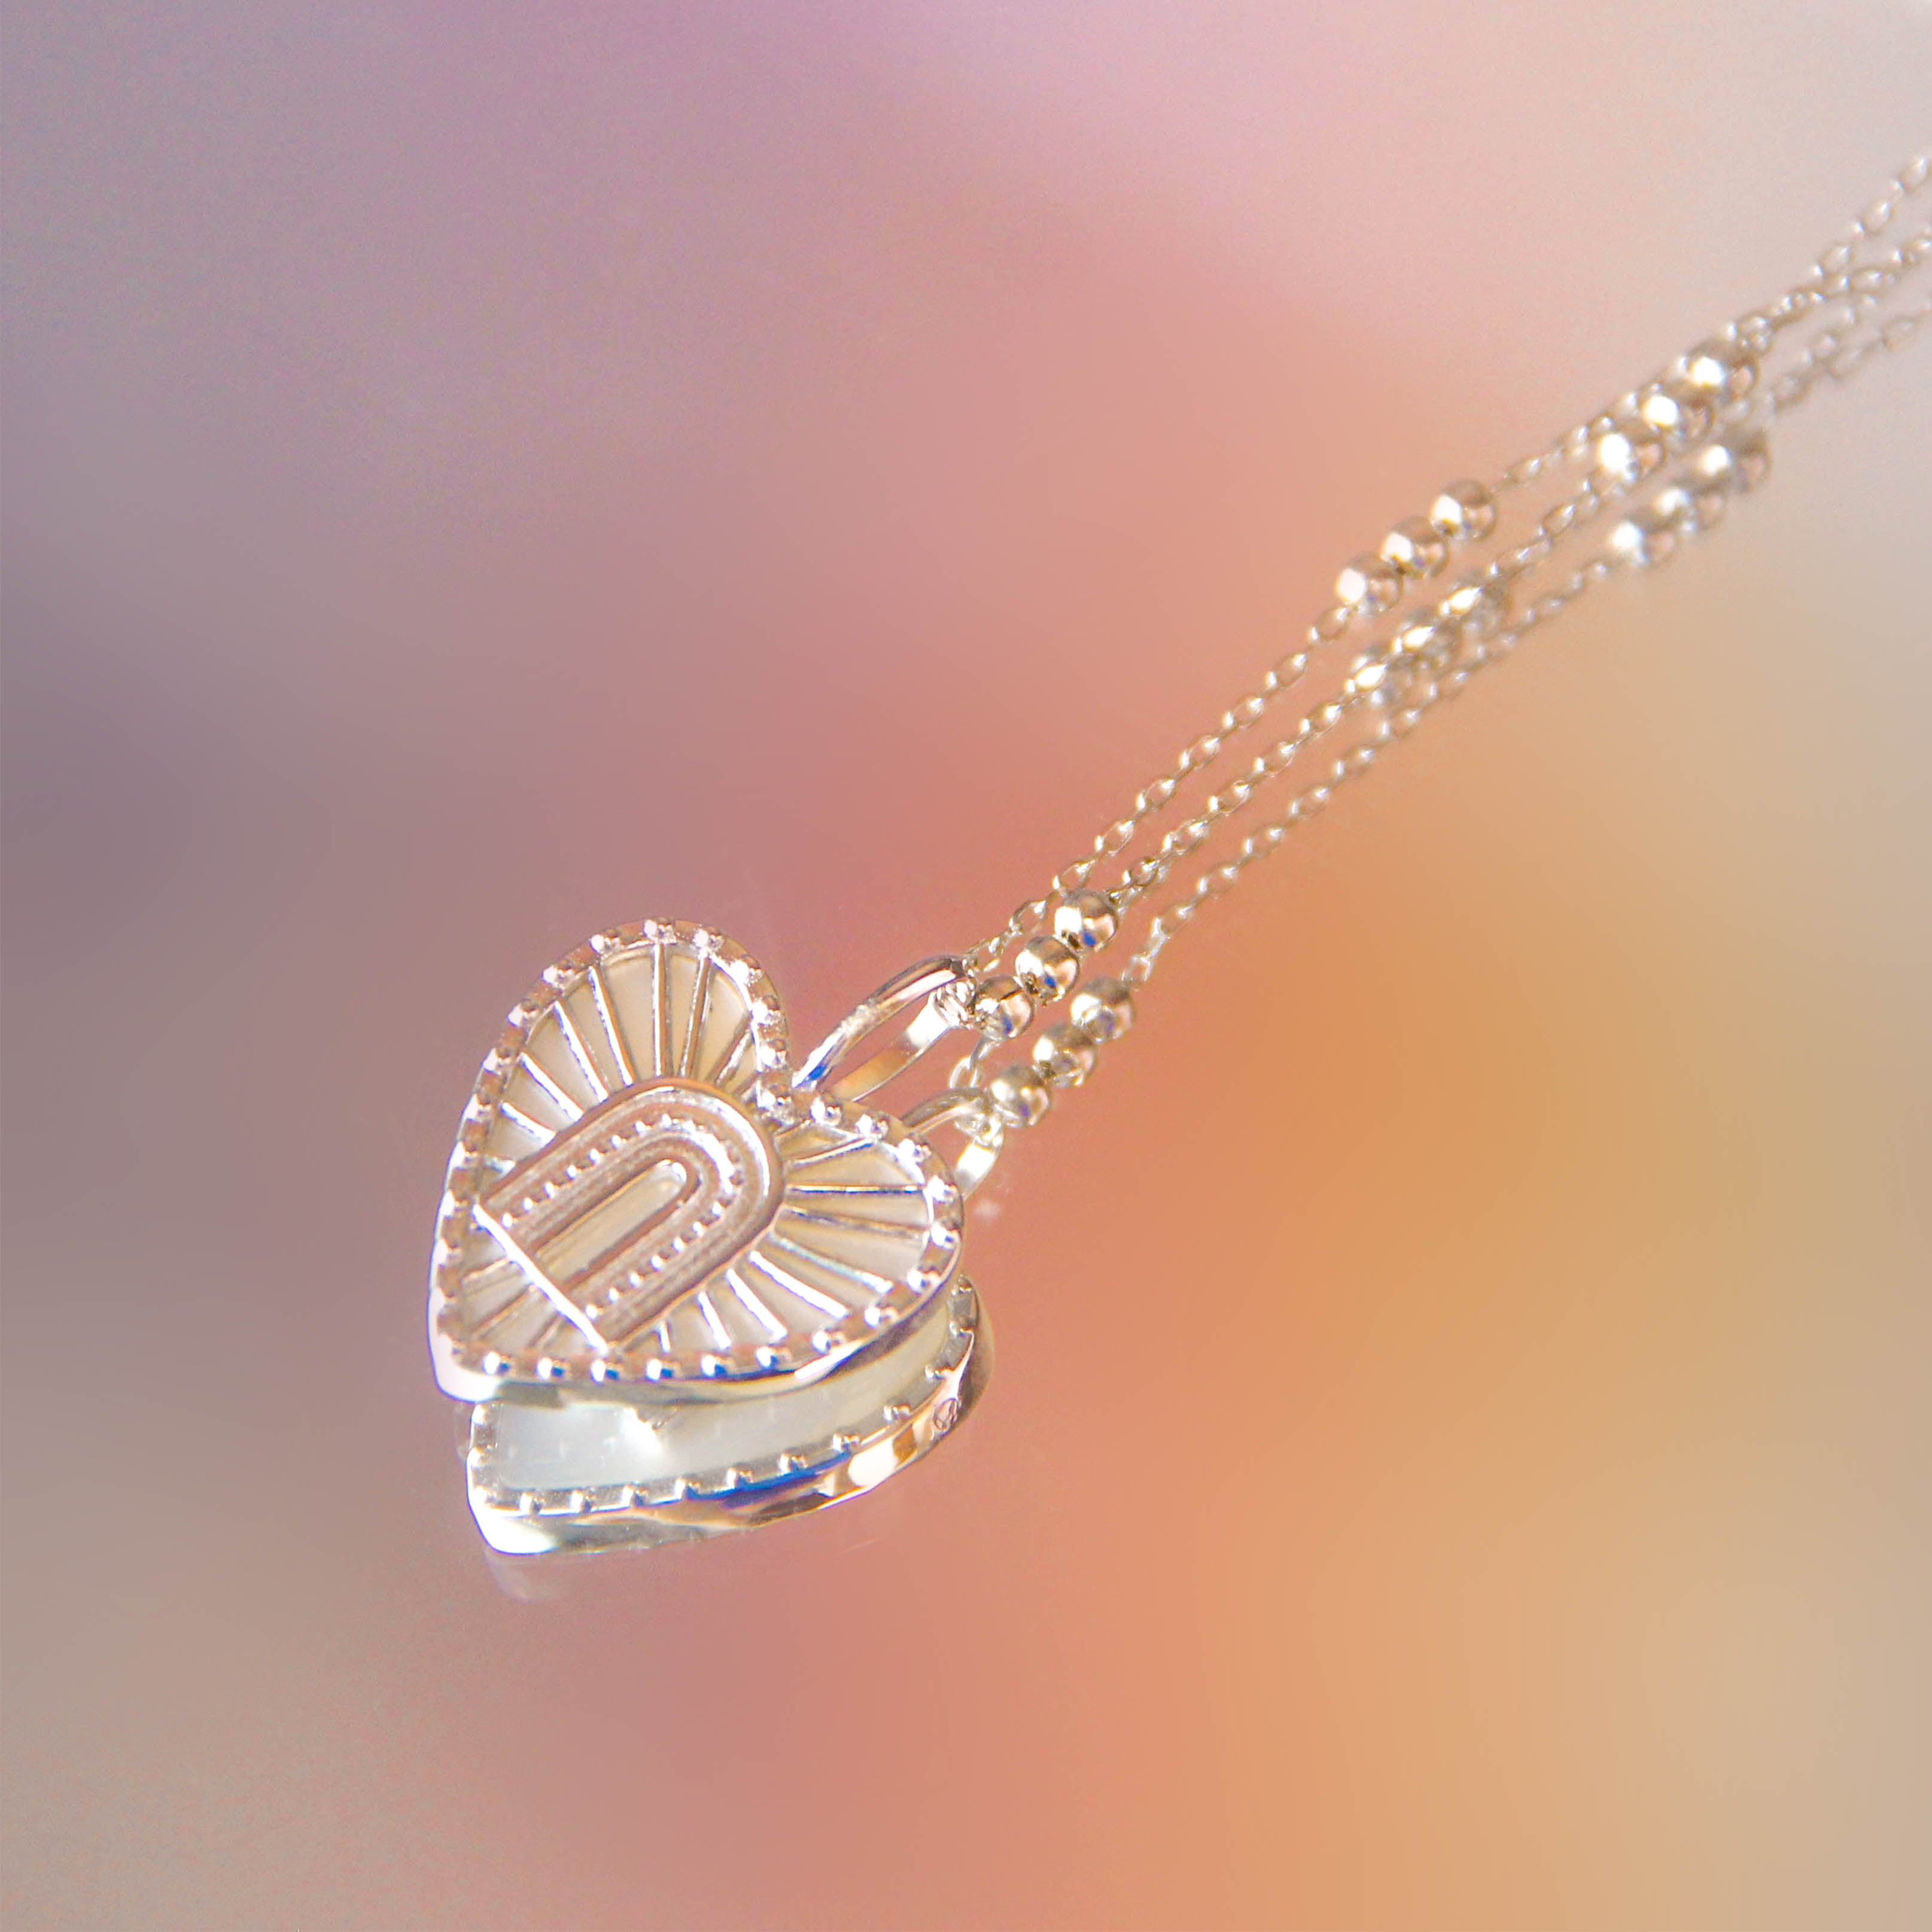 Mother of Pearl Silver 2 Sided Heart Pendant - Joy | LOVE BY THE MOON